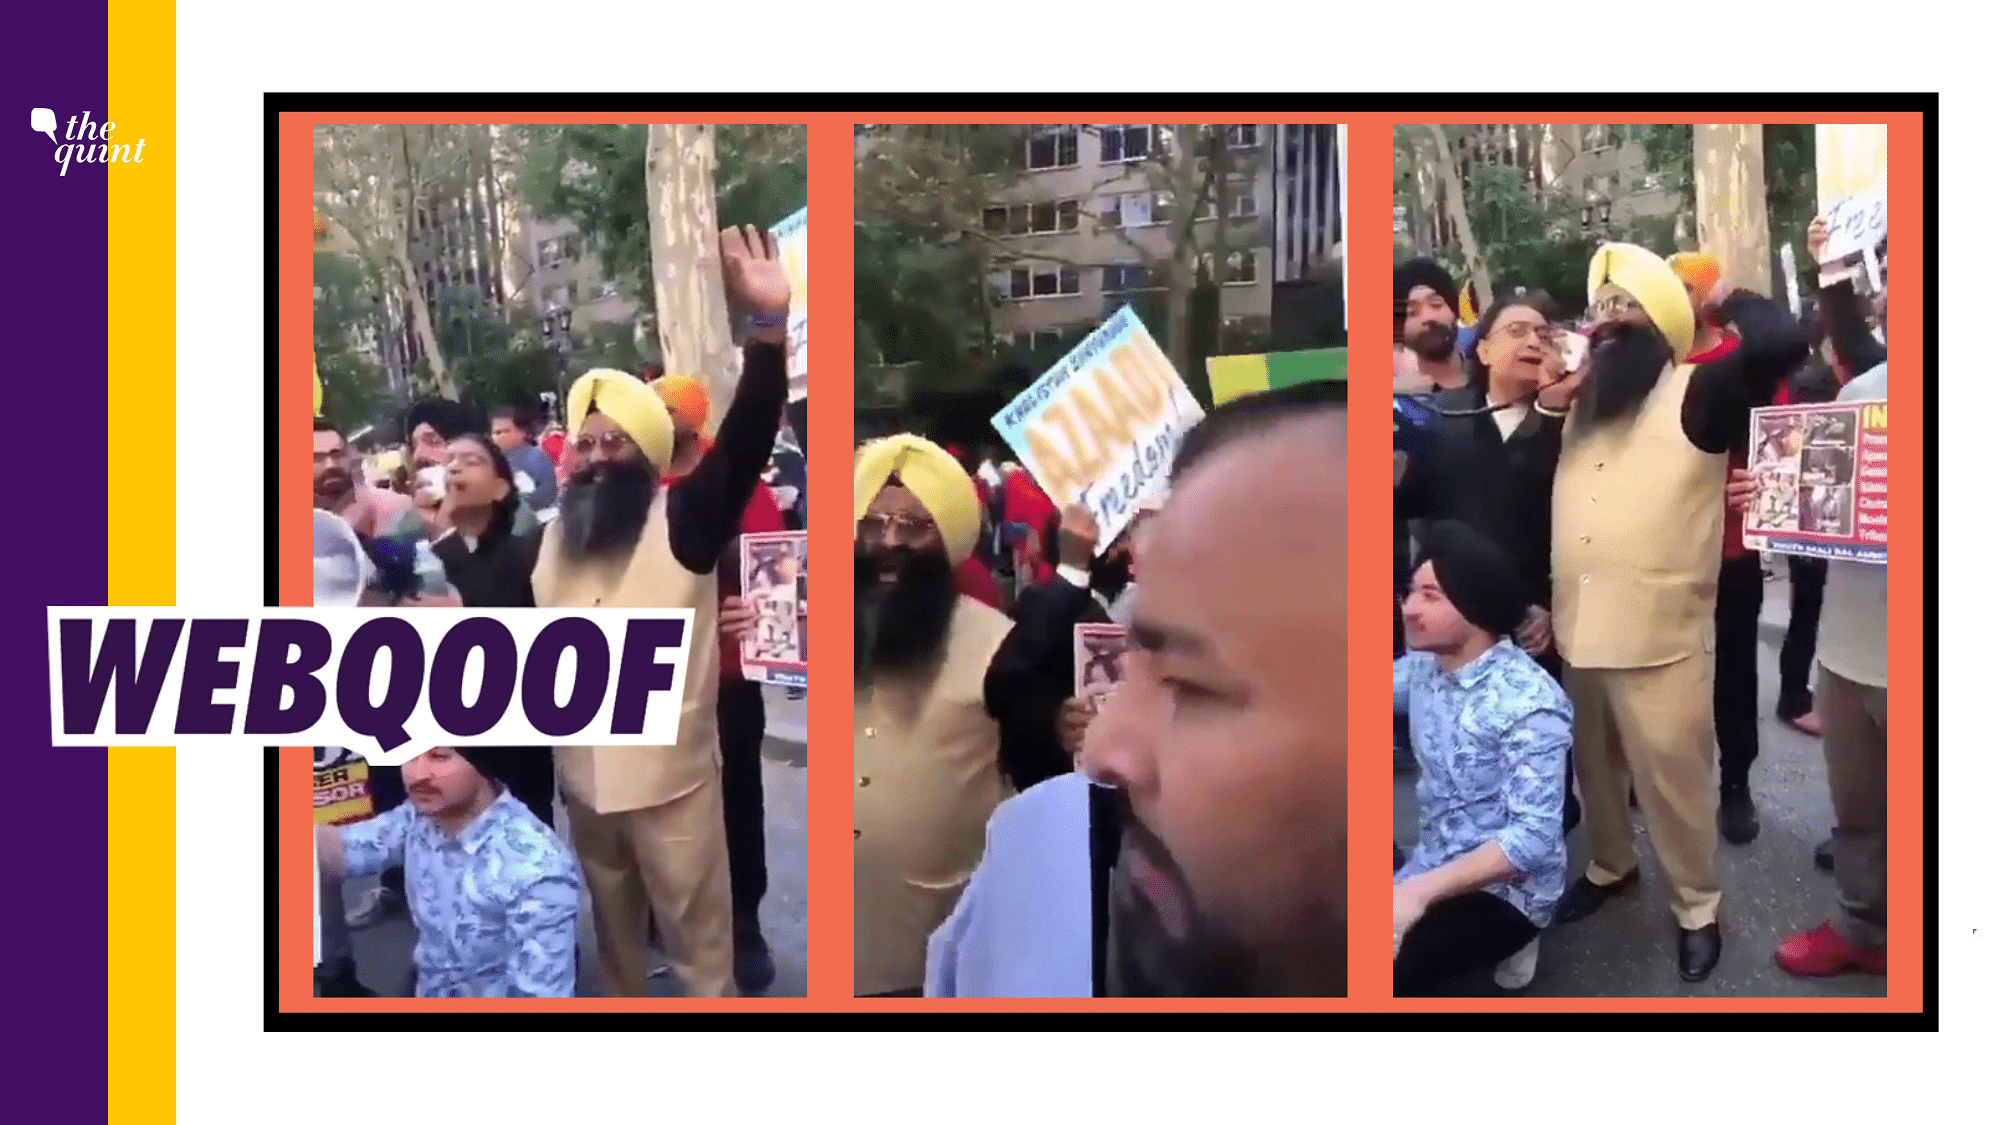 The video showed protesters agitating against Prime Minister Narendra Modi while he delivered his speech at the United Nations General Assembly (UNGA).